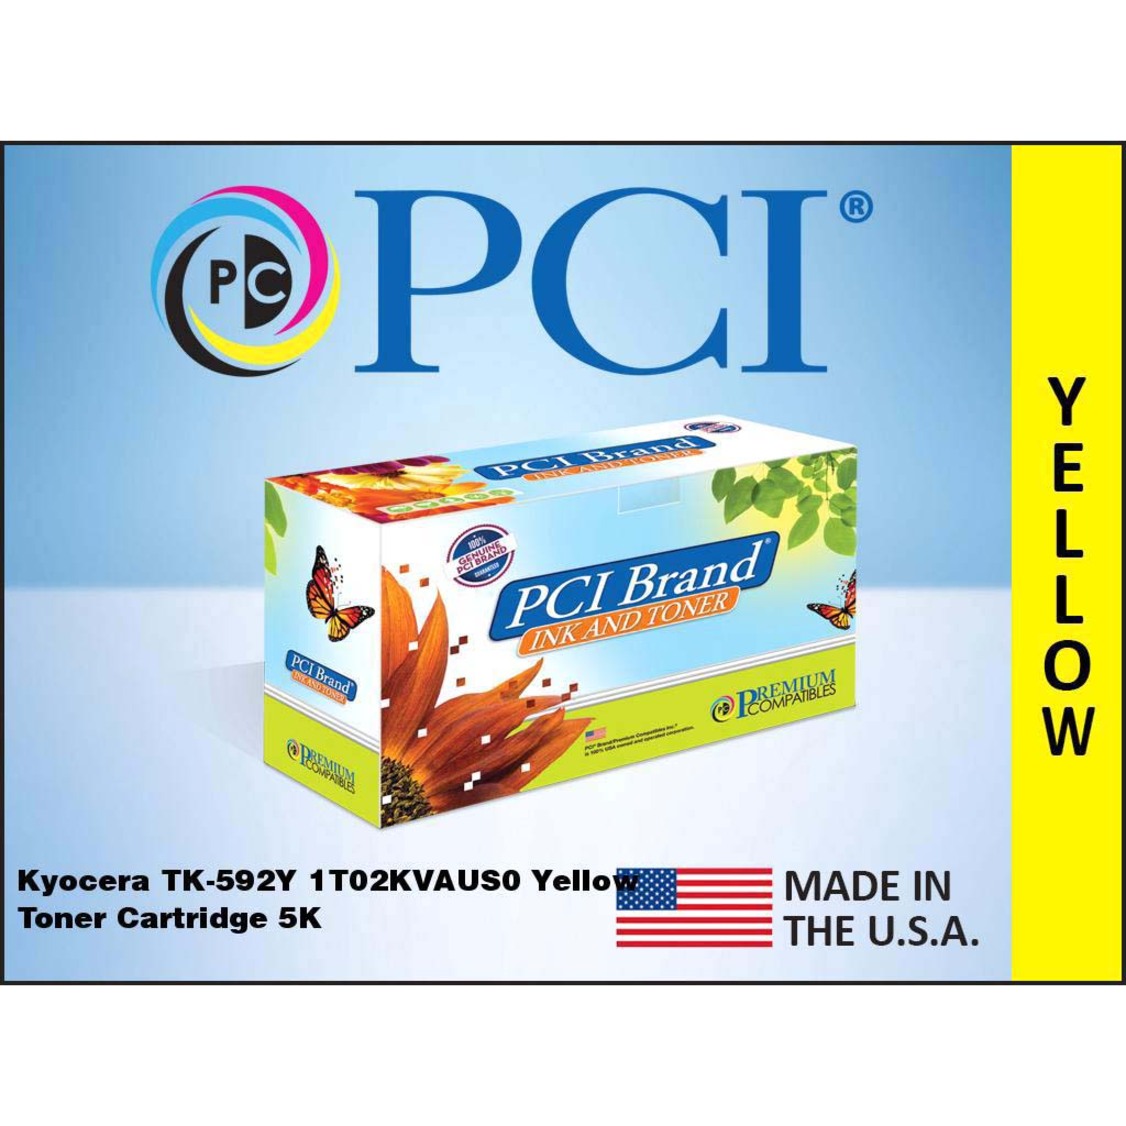 Premium Compatibles TK592Y-PCI Kyocera Yellow Toner Cartridge 5K Yield, Made in the USA